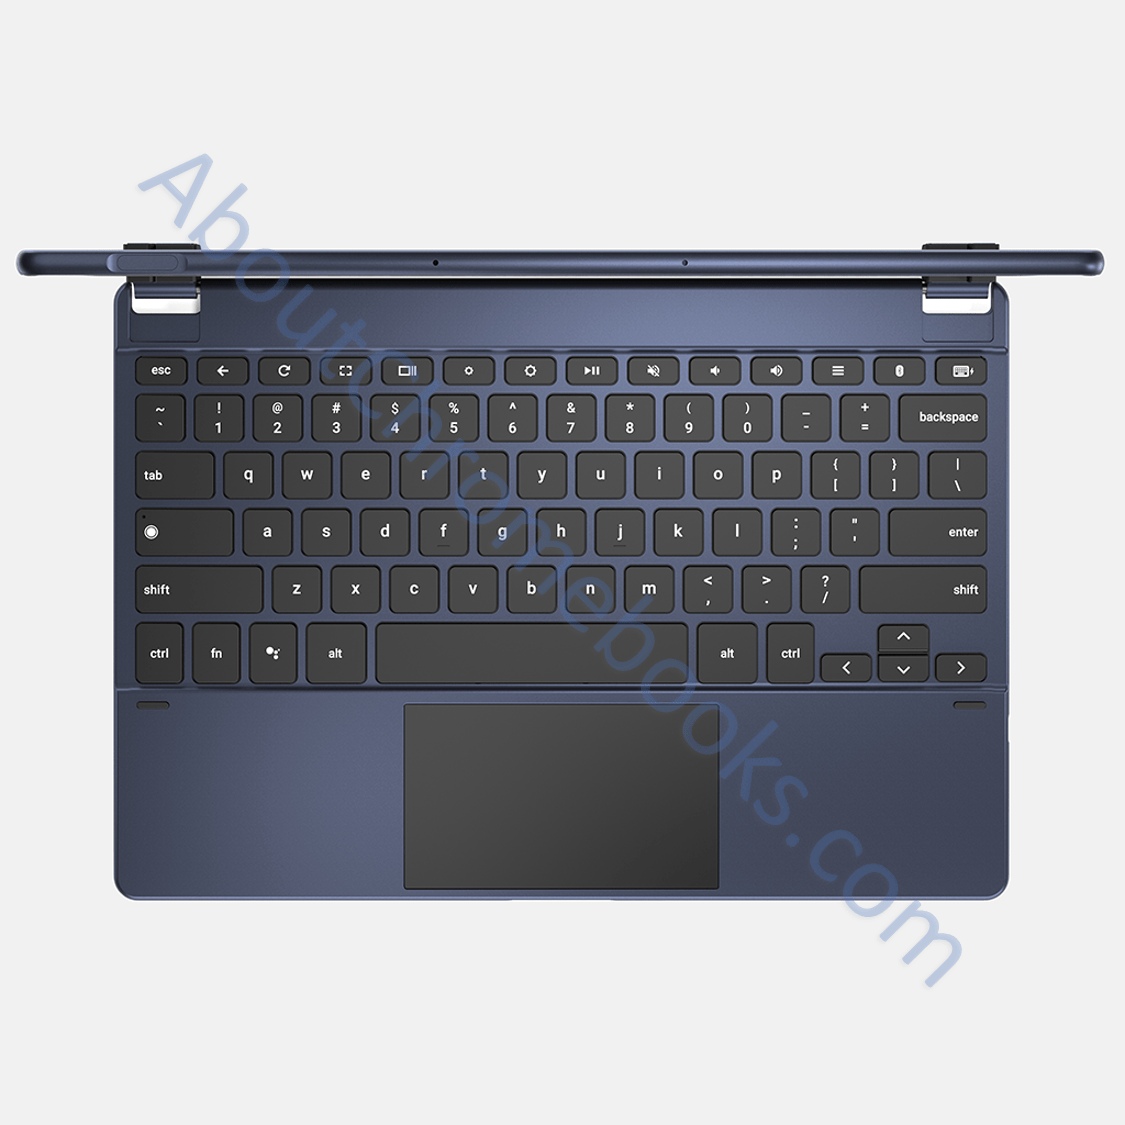 Wallaby keyboard with Chrome tablet top